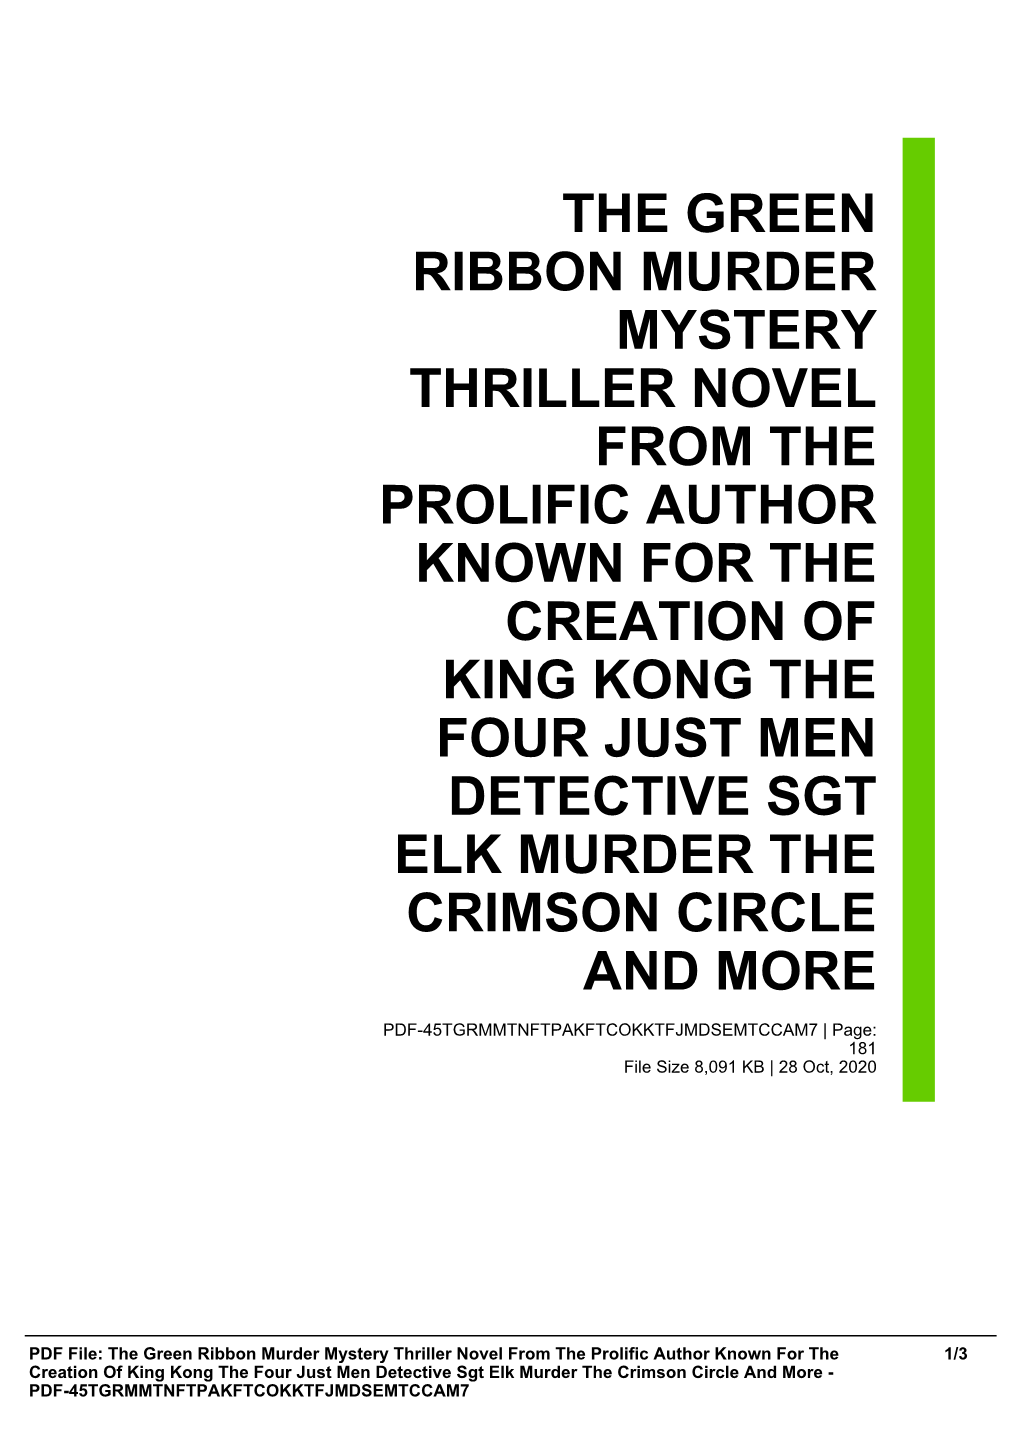 The Green Ribbon Murder Mystery Thriller Novel from the Prolific